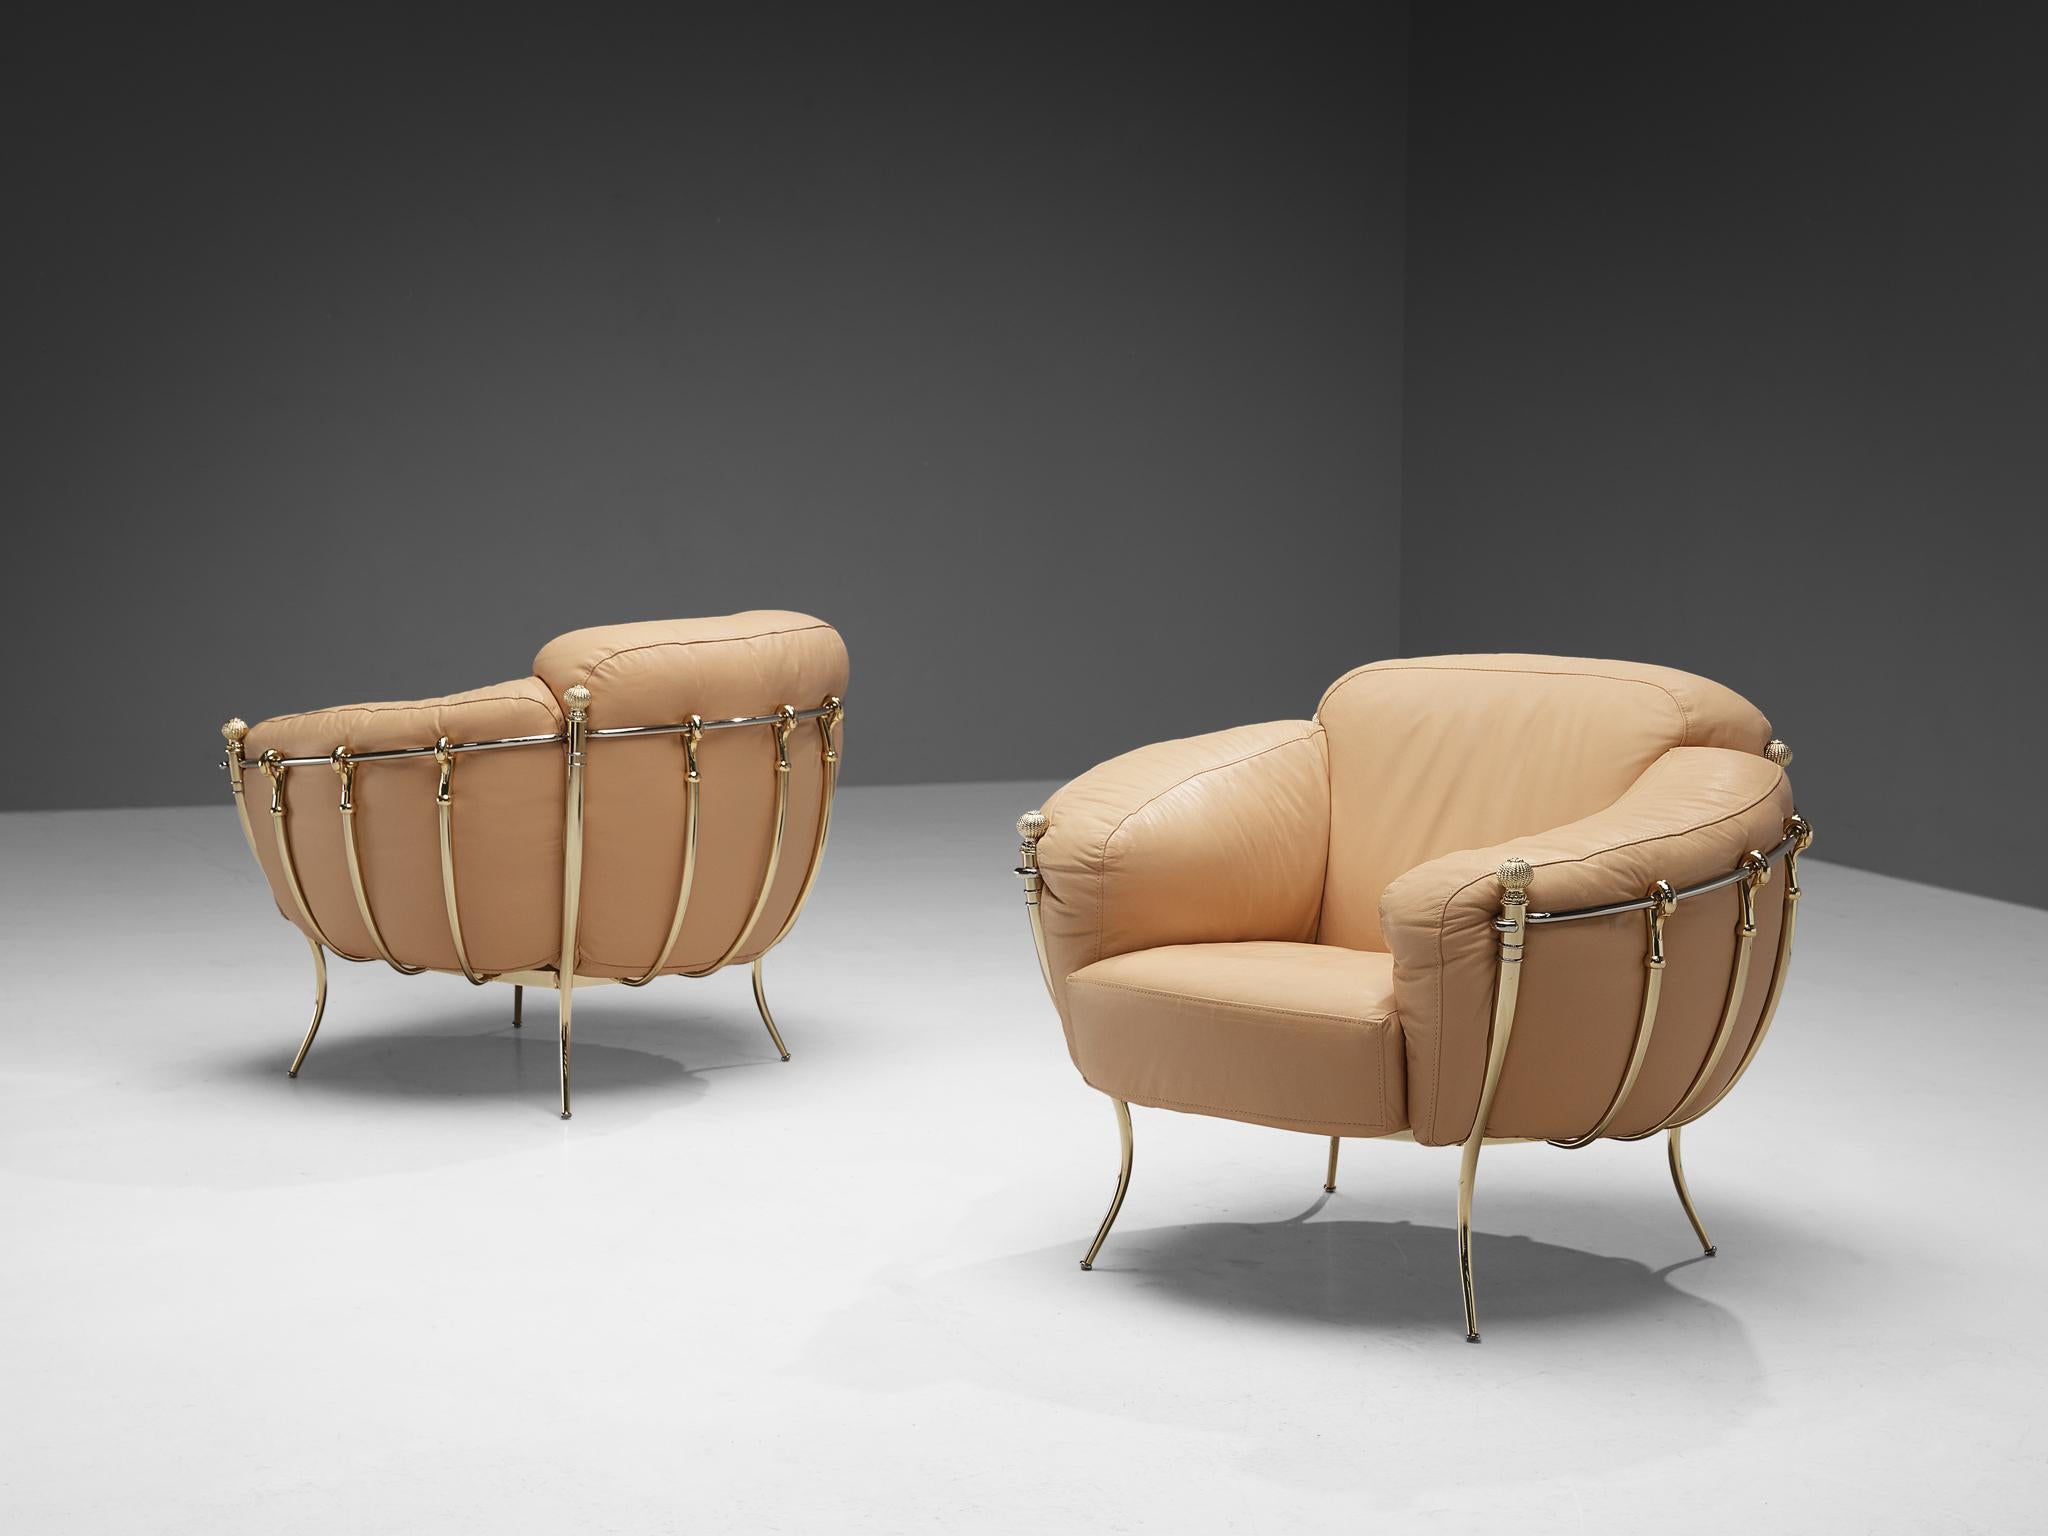 Lounge chairs, leather, brass, Spain, 1980s

A highly delicate pair of club chairs with voluminous shapes and eccentric decorations. The brass frame is composed of curved tubes that are beautifully bent at the ends. Four outer legs resemble pillars